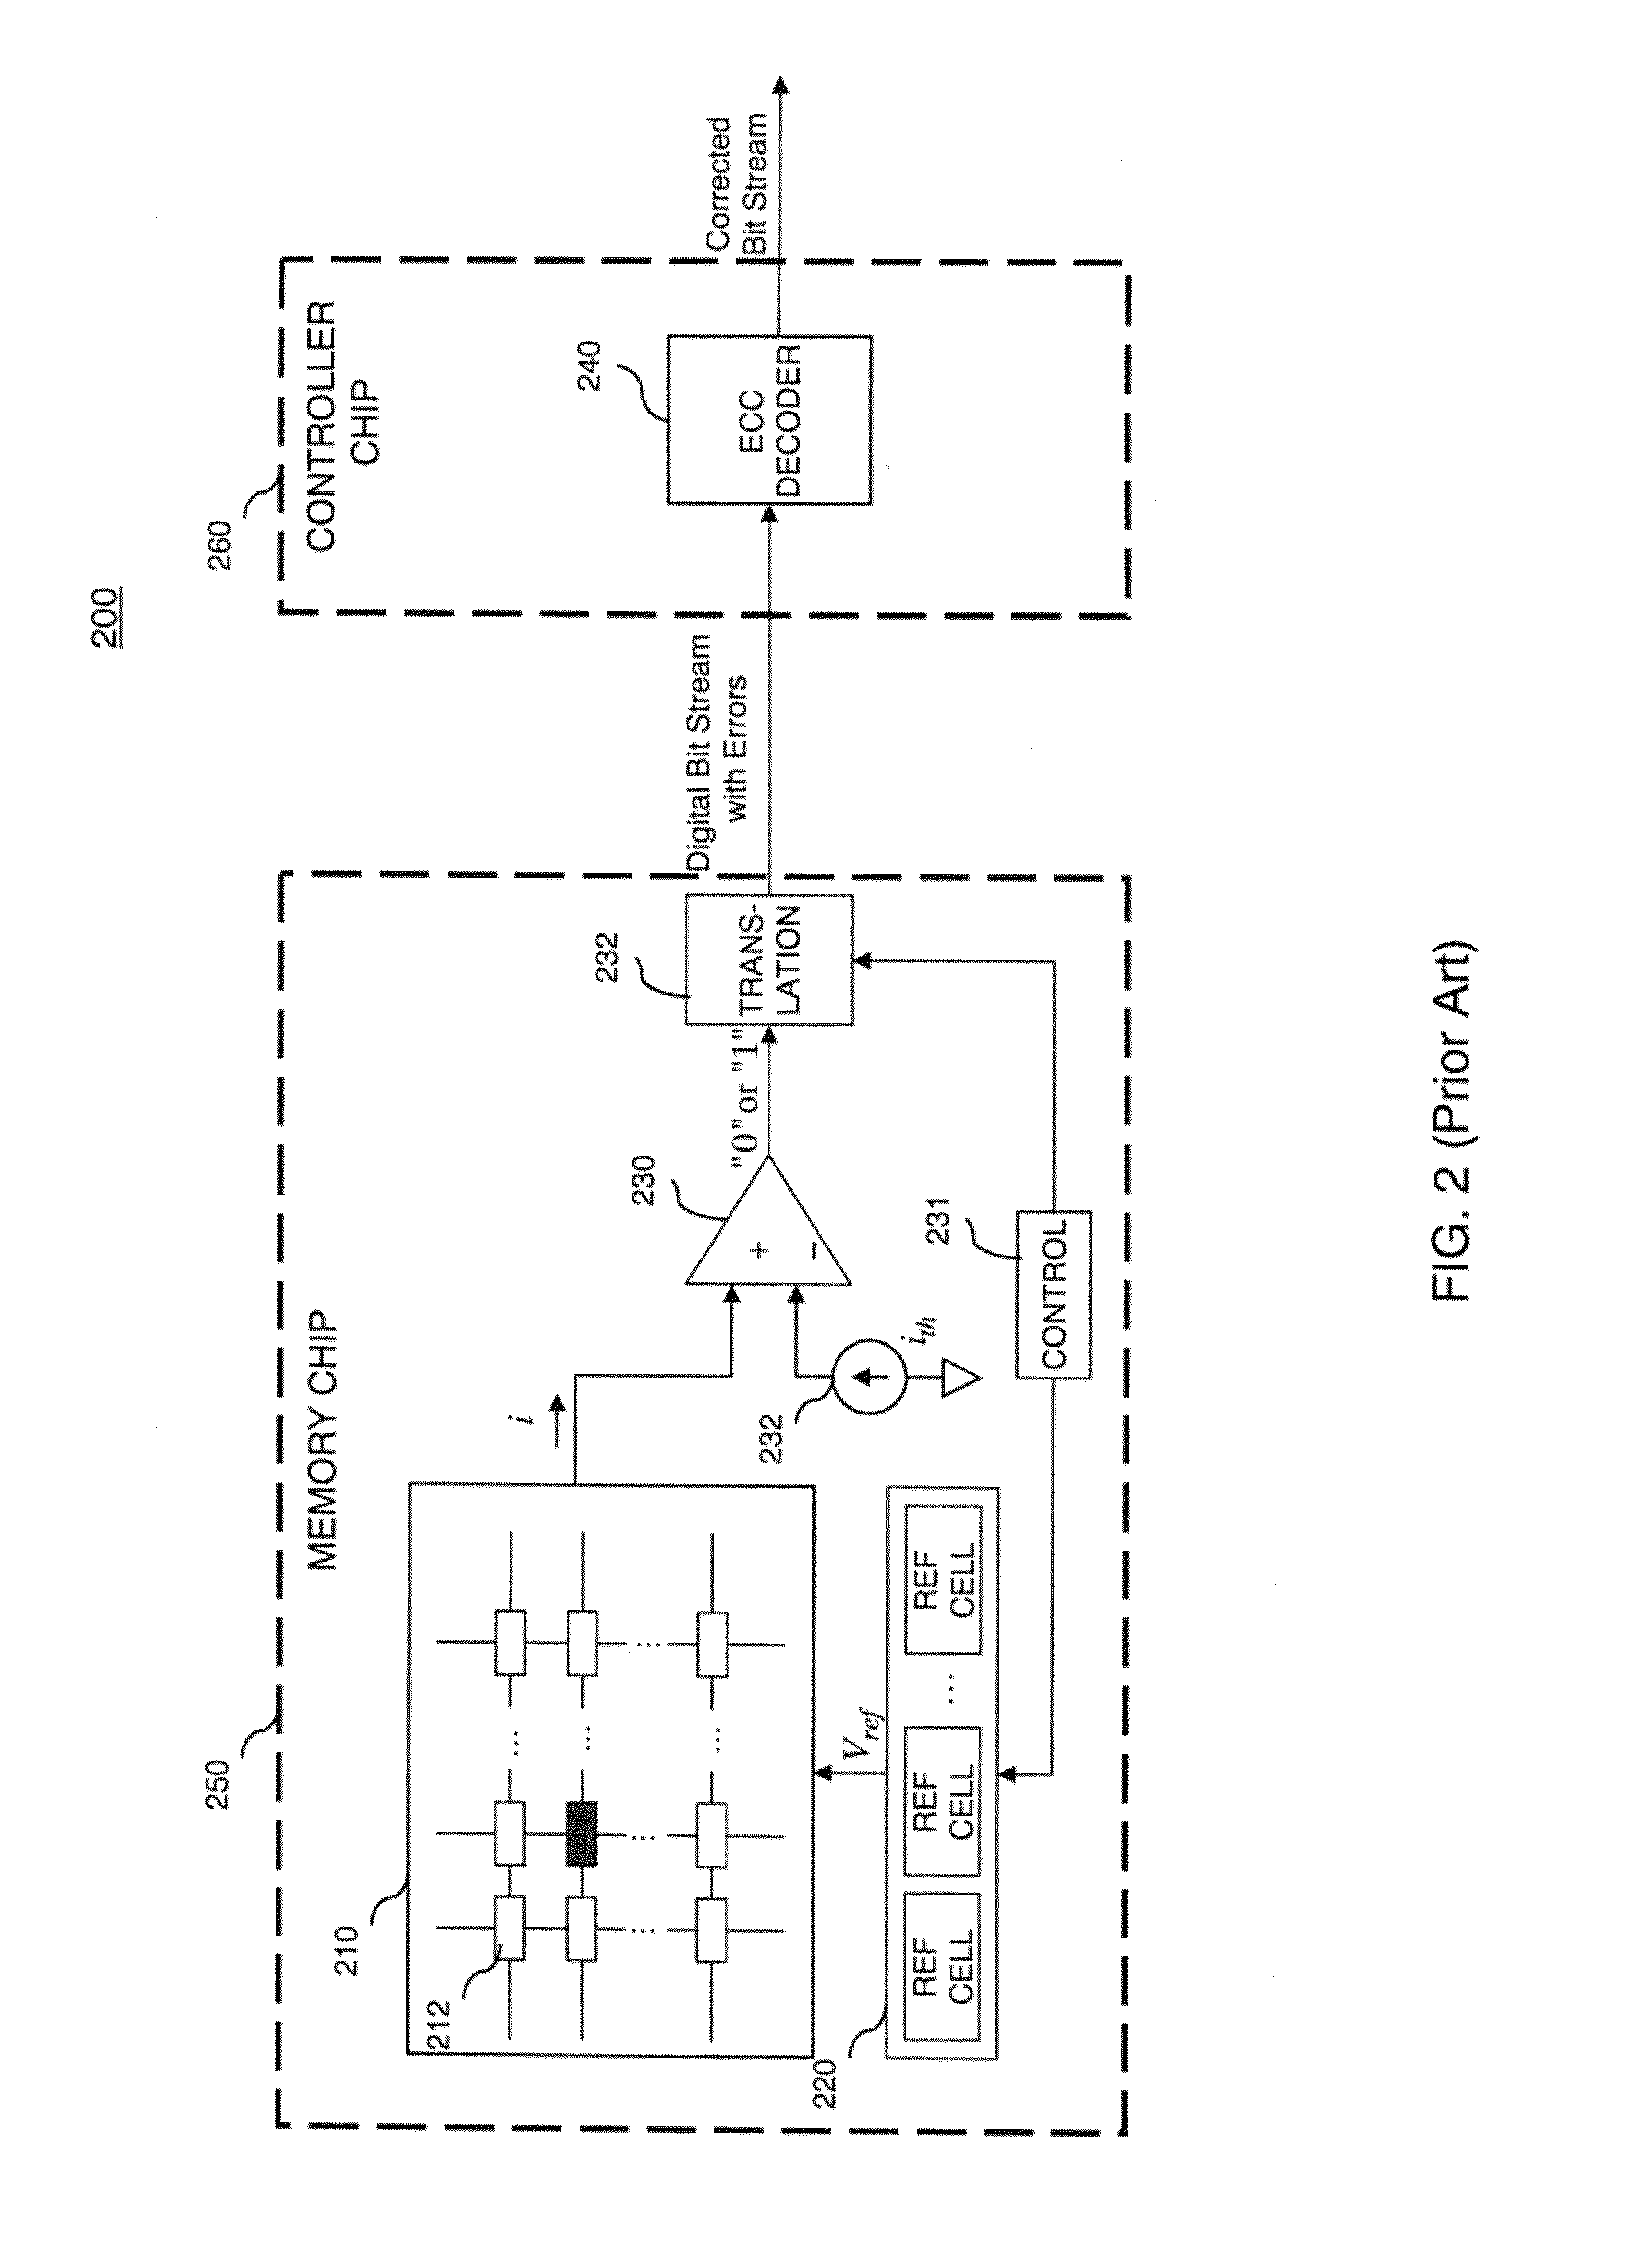 Storage devices with soft processing